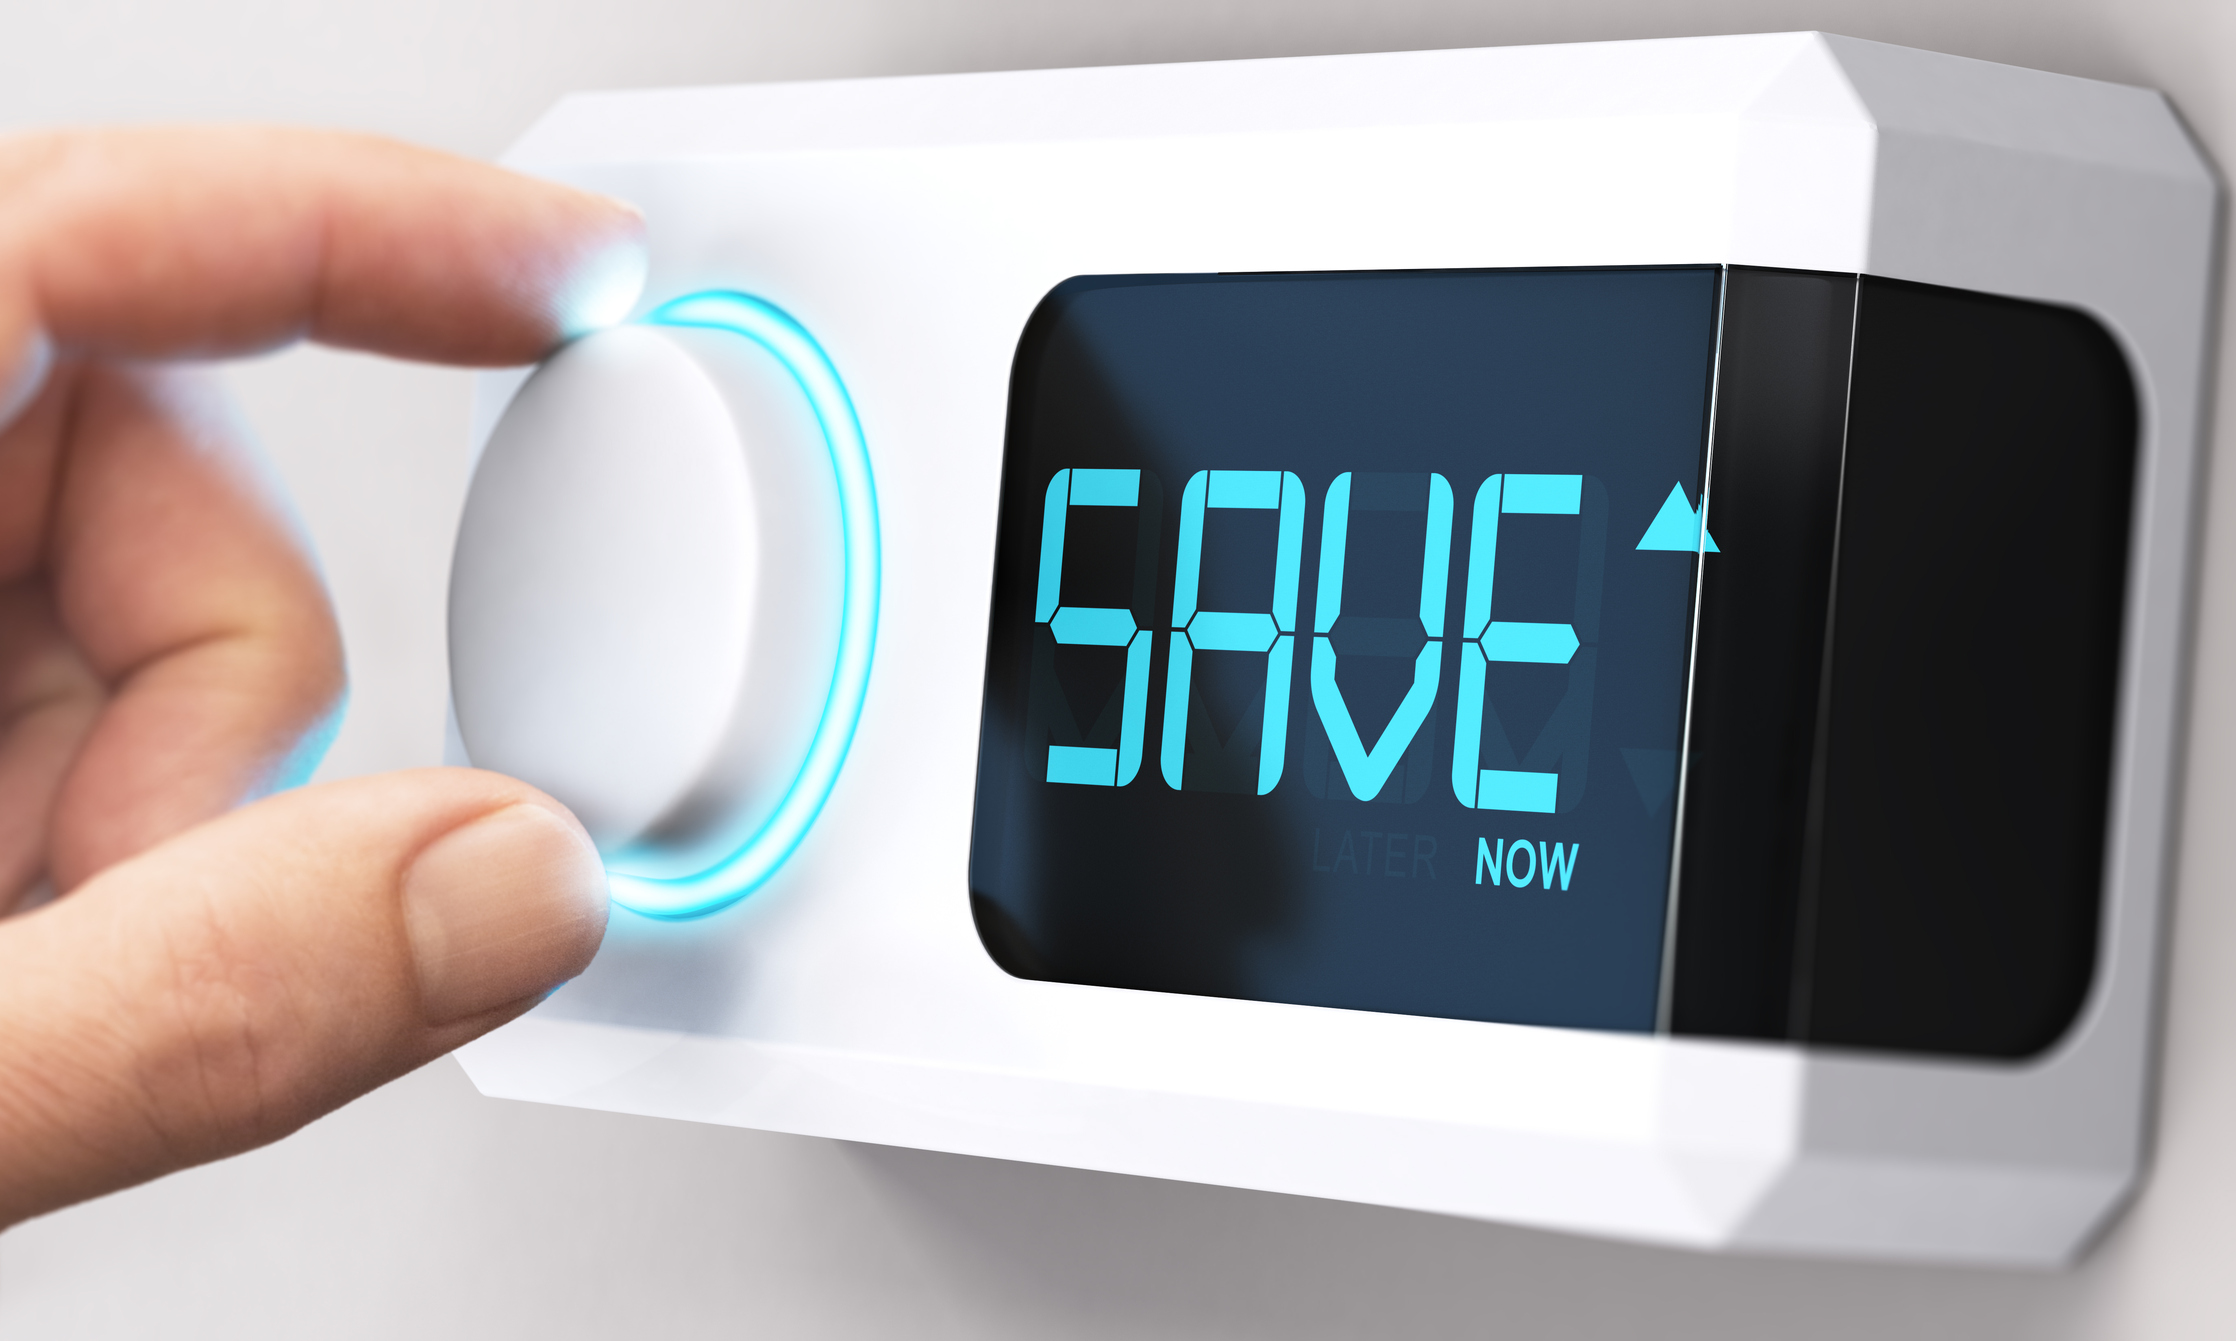 Hand turning a thermostat knob to increase savings by decreasing energy consumption. Thermostat digital screen reads "SAVE Now"